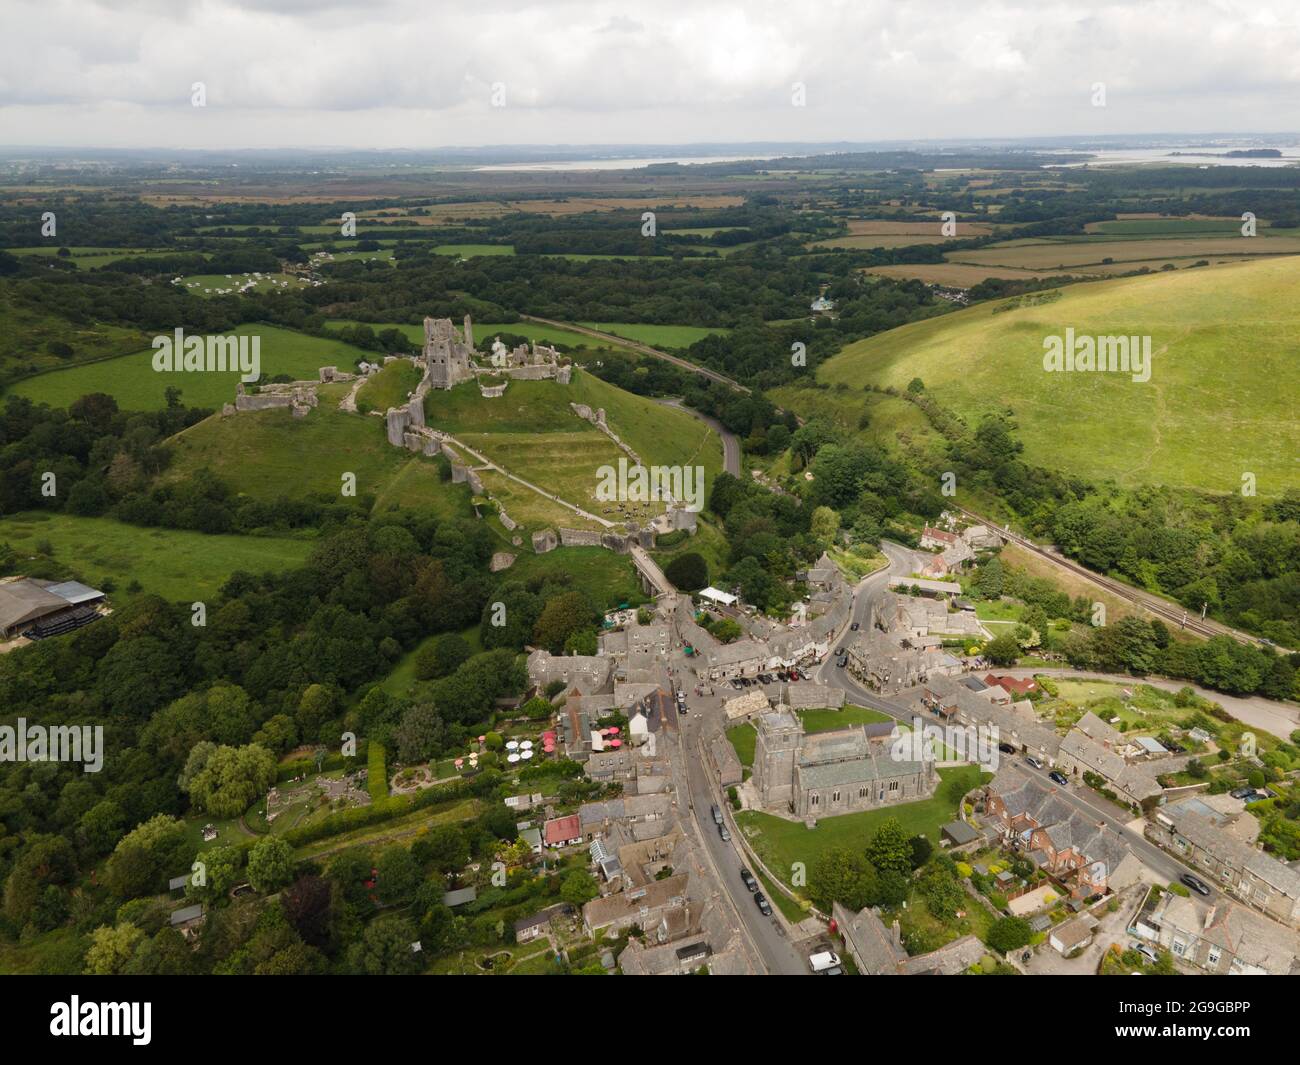 Aerial view of Corfe Castle, an historic ruins near Swanage in Dorsets Jurassic Coast- UK Stock Photo